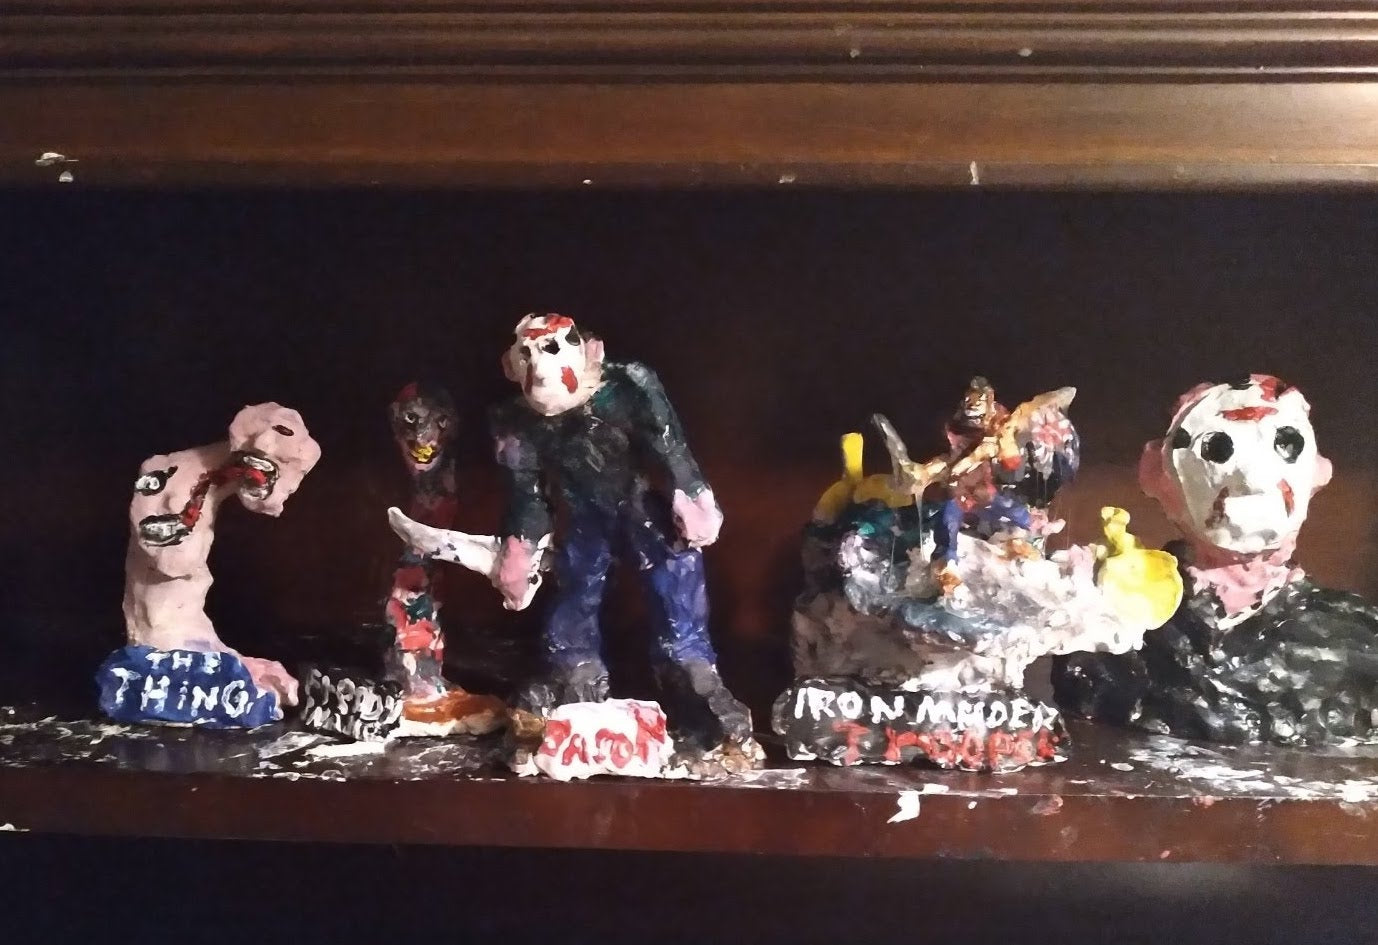 a row of painted mixed-media sculptures lined up on a wooden shelf at the artist's home. Each sculpture depicts a different movie villain or metal band. On the far left is a sculpture of a figure with a long neck and a head that seems to be splitting in two. Text written on the base reads "The Thing." To the right are sculptures of the head and neck of movie villain "Freddie" from Nightmare on Elm street, with his yellow teeth and red and black striped shirt. In the center of the image is a sculpture of movie villain Jason from Friday the 13th: a person wearing a white hockey mask stained with blood, striding forward wielding a machete. To the right of Jason is a sculpture of what appears to be a group of figures on a rocky surface, labeled "Iron Maiden." And finally, to the far right sits a larger bust of Jason, with a black shirt, pink skin, and the same blood stained hockey mask. The shelf is spotted with white paint.